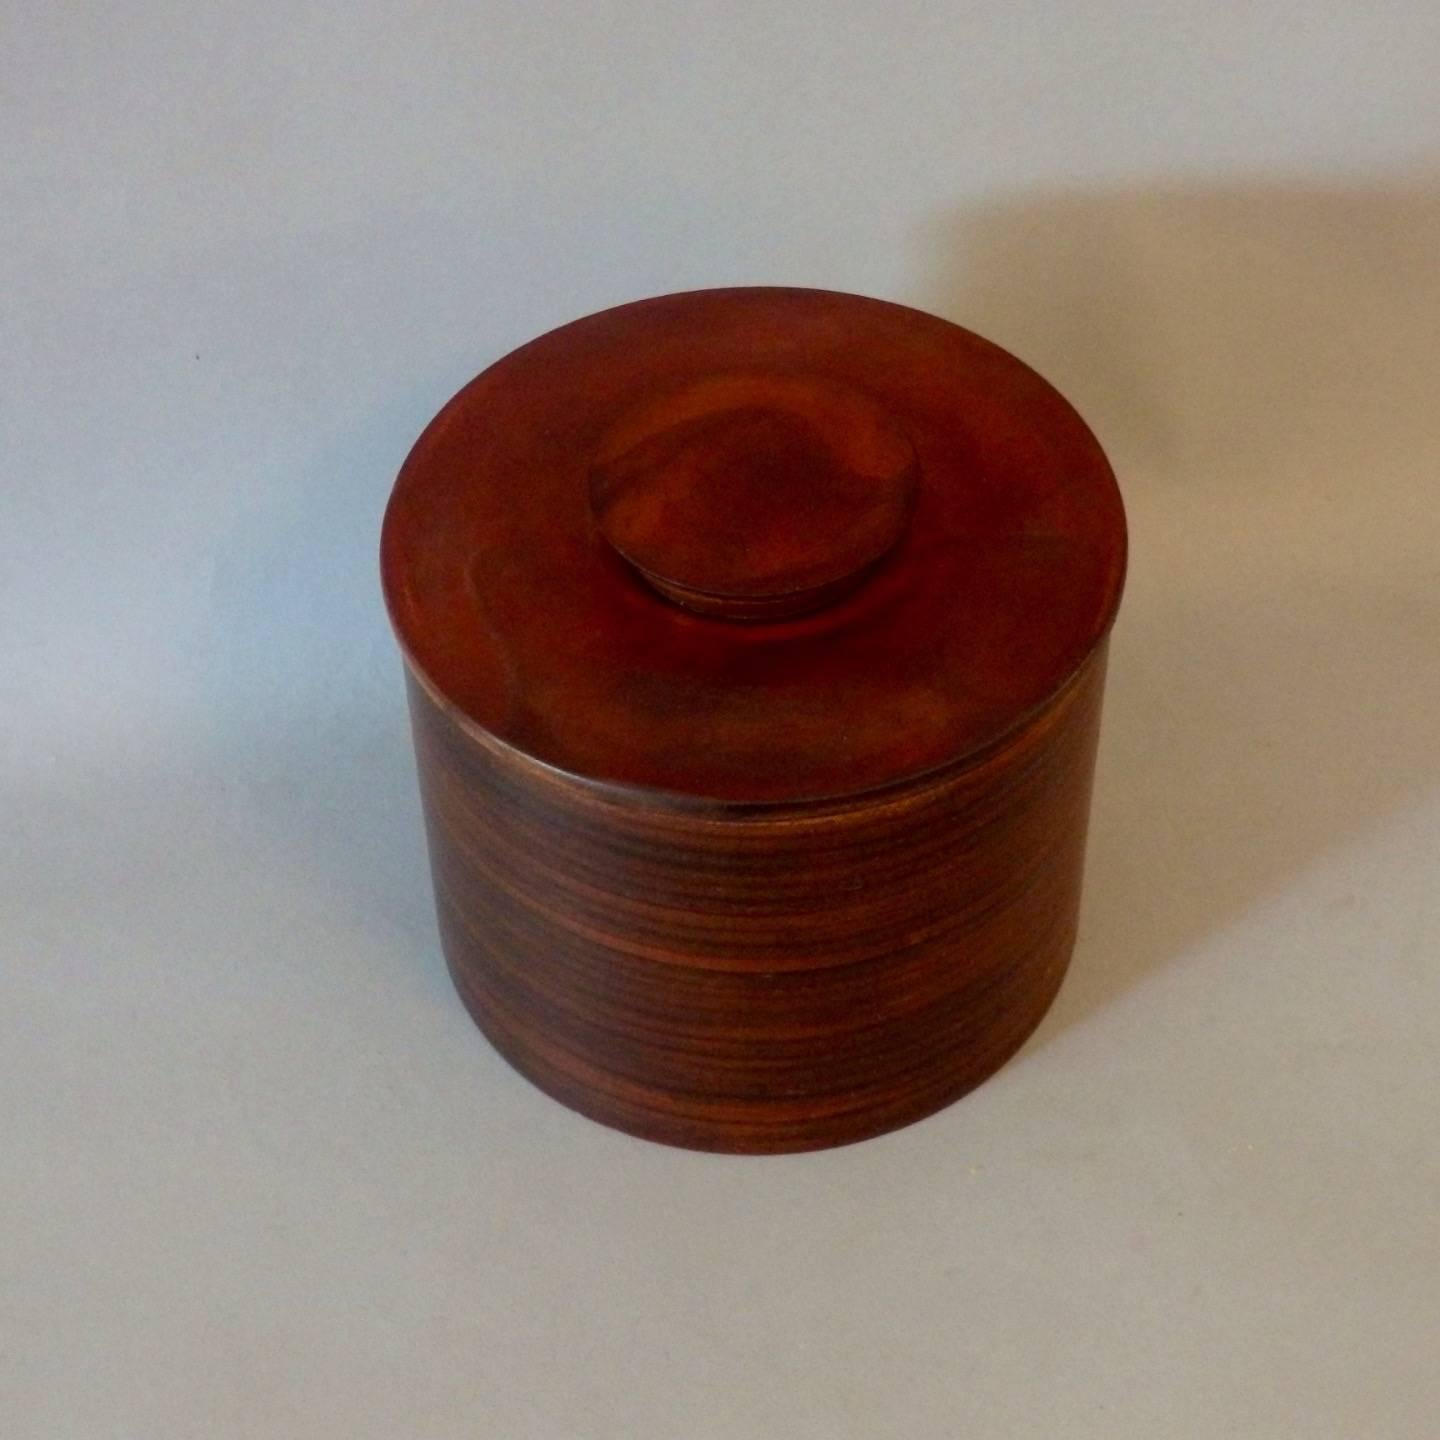 Very nicely made stacked and laminated solid saddle leather forming a cylinder box with solid leather lid and finial handle.